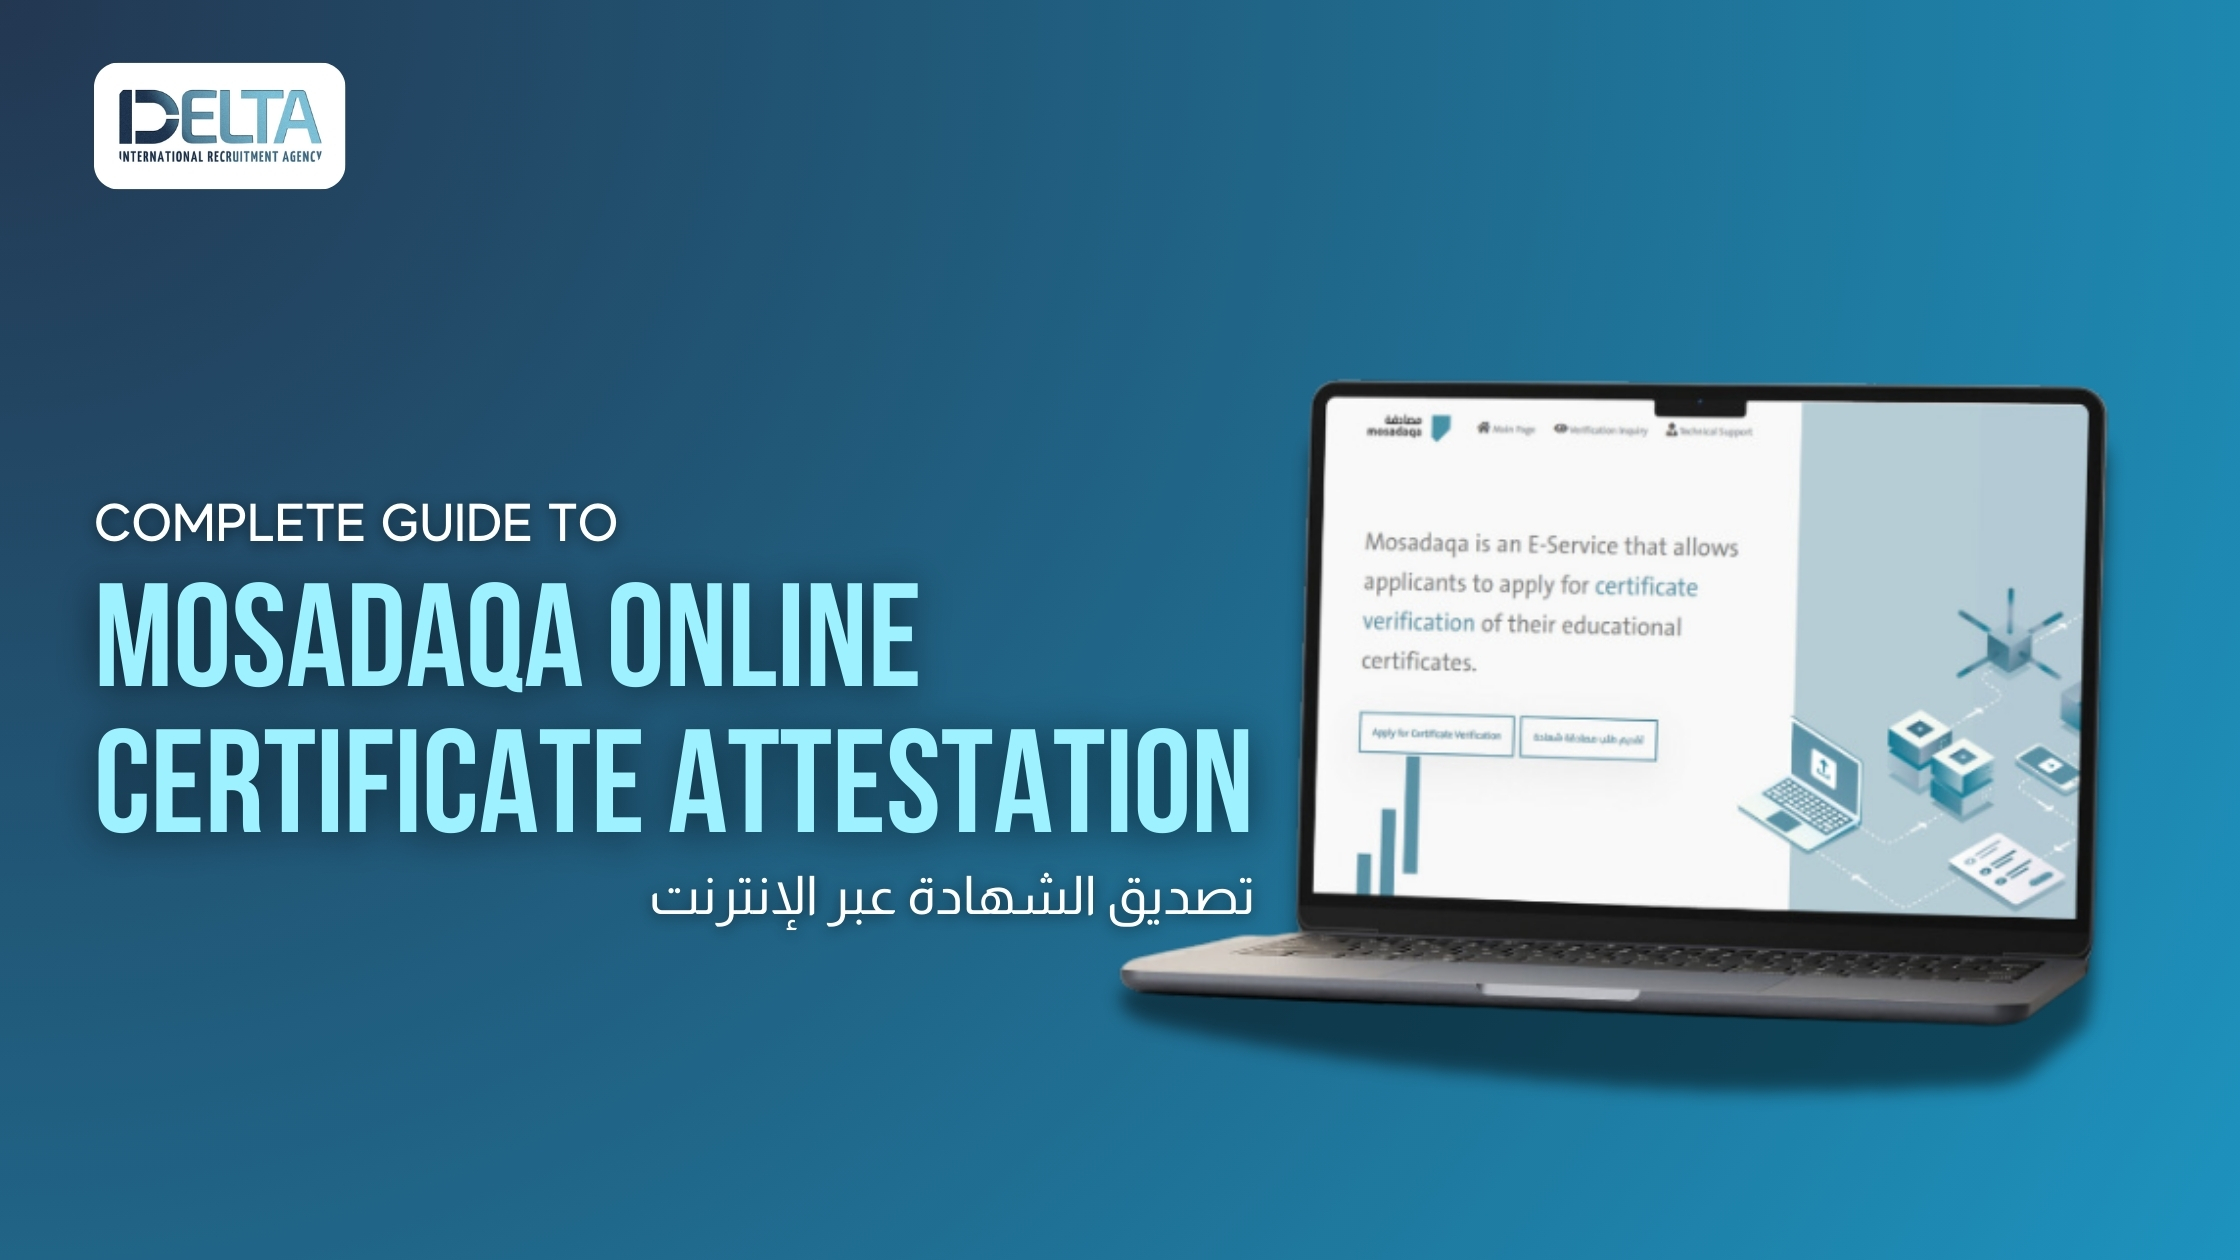 Complete Guide to Mosadaqa Online Certificate Attestation in Pakistan for Saudi Arabia